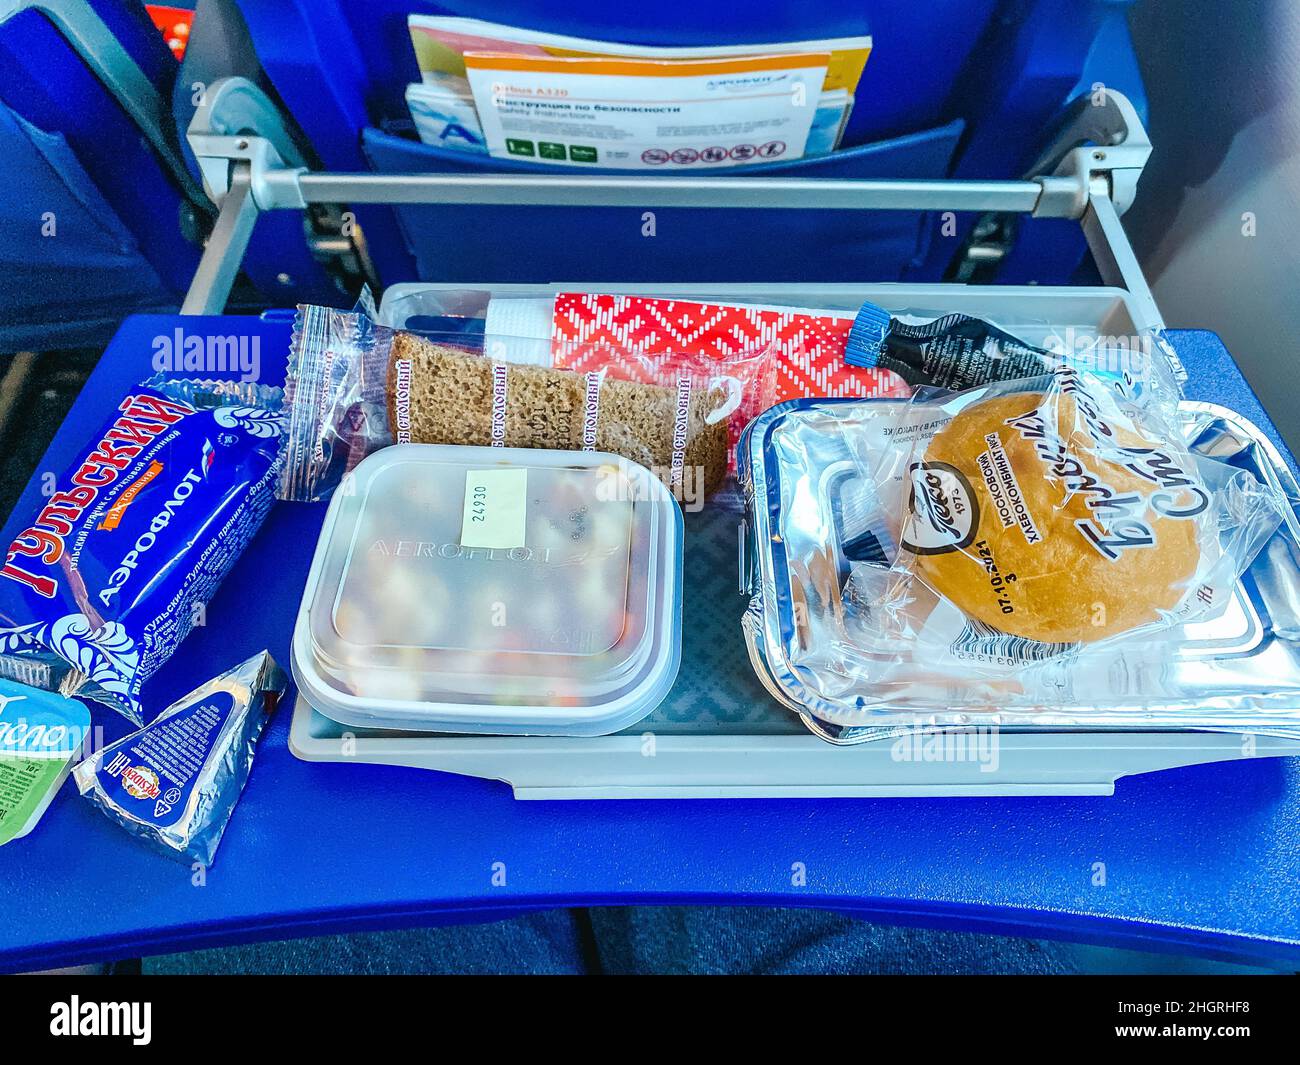 Moscow, Russia - 08.10.2021: Passenger's meal in Aeroflot airplane during  the flight. Hot lunch on the blue seat table. Hight quality photo Stock  Photo - Alamy